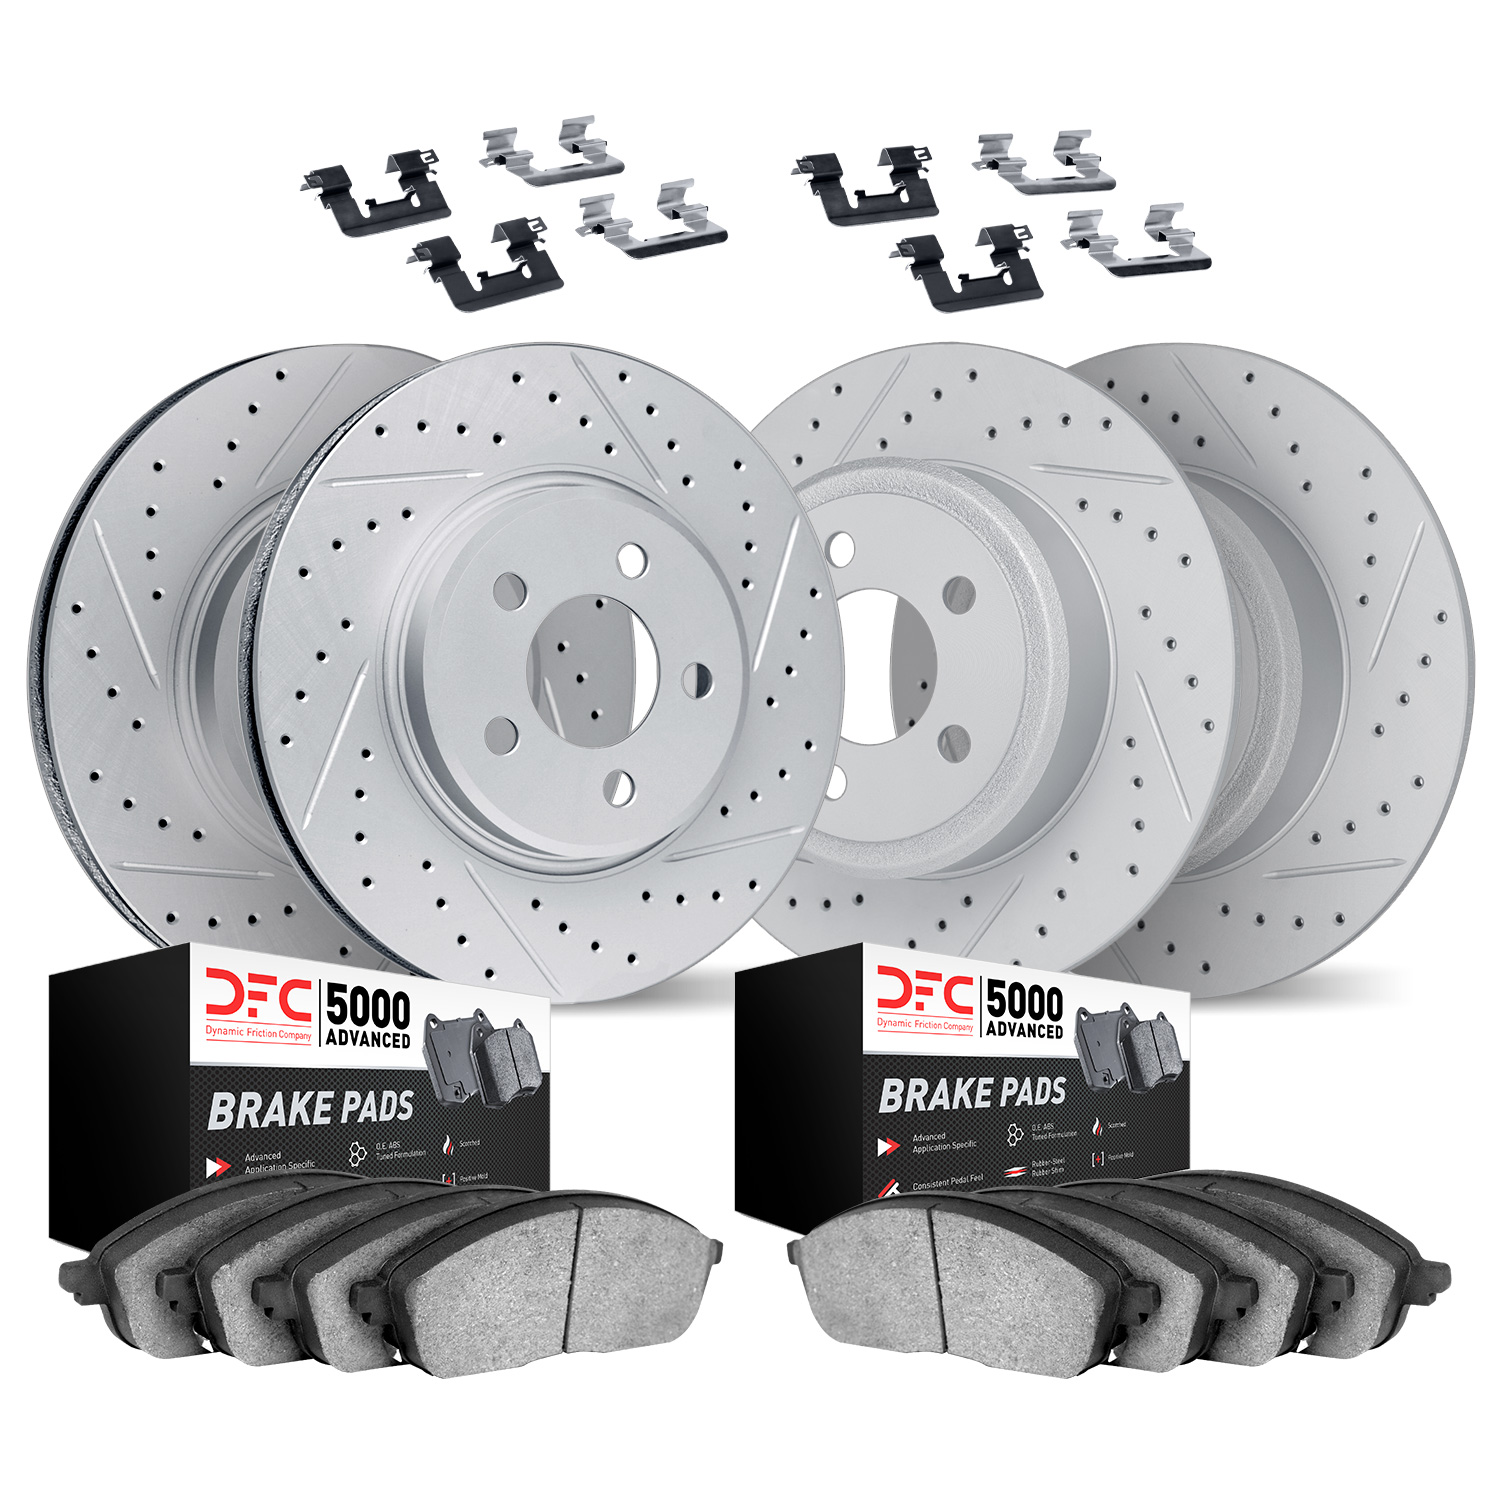 2514-45026 Geoperformance Drilled/Slotted Rotors w/5000 Advanced Brake Pads Kit & Hardware, 2017-2020 GM, Position: Front and Re